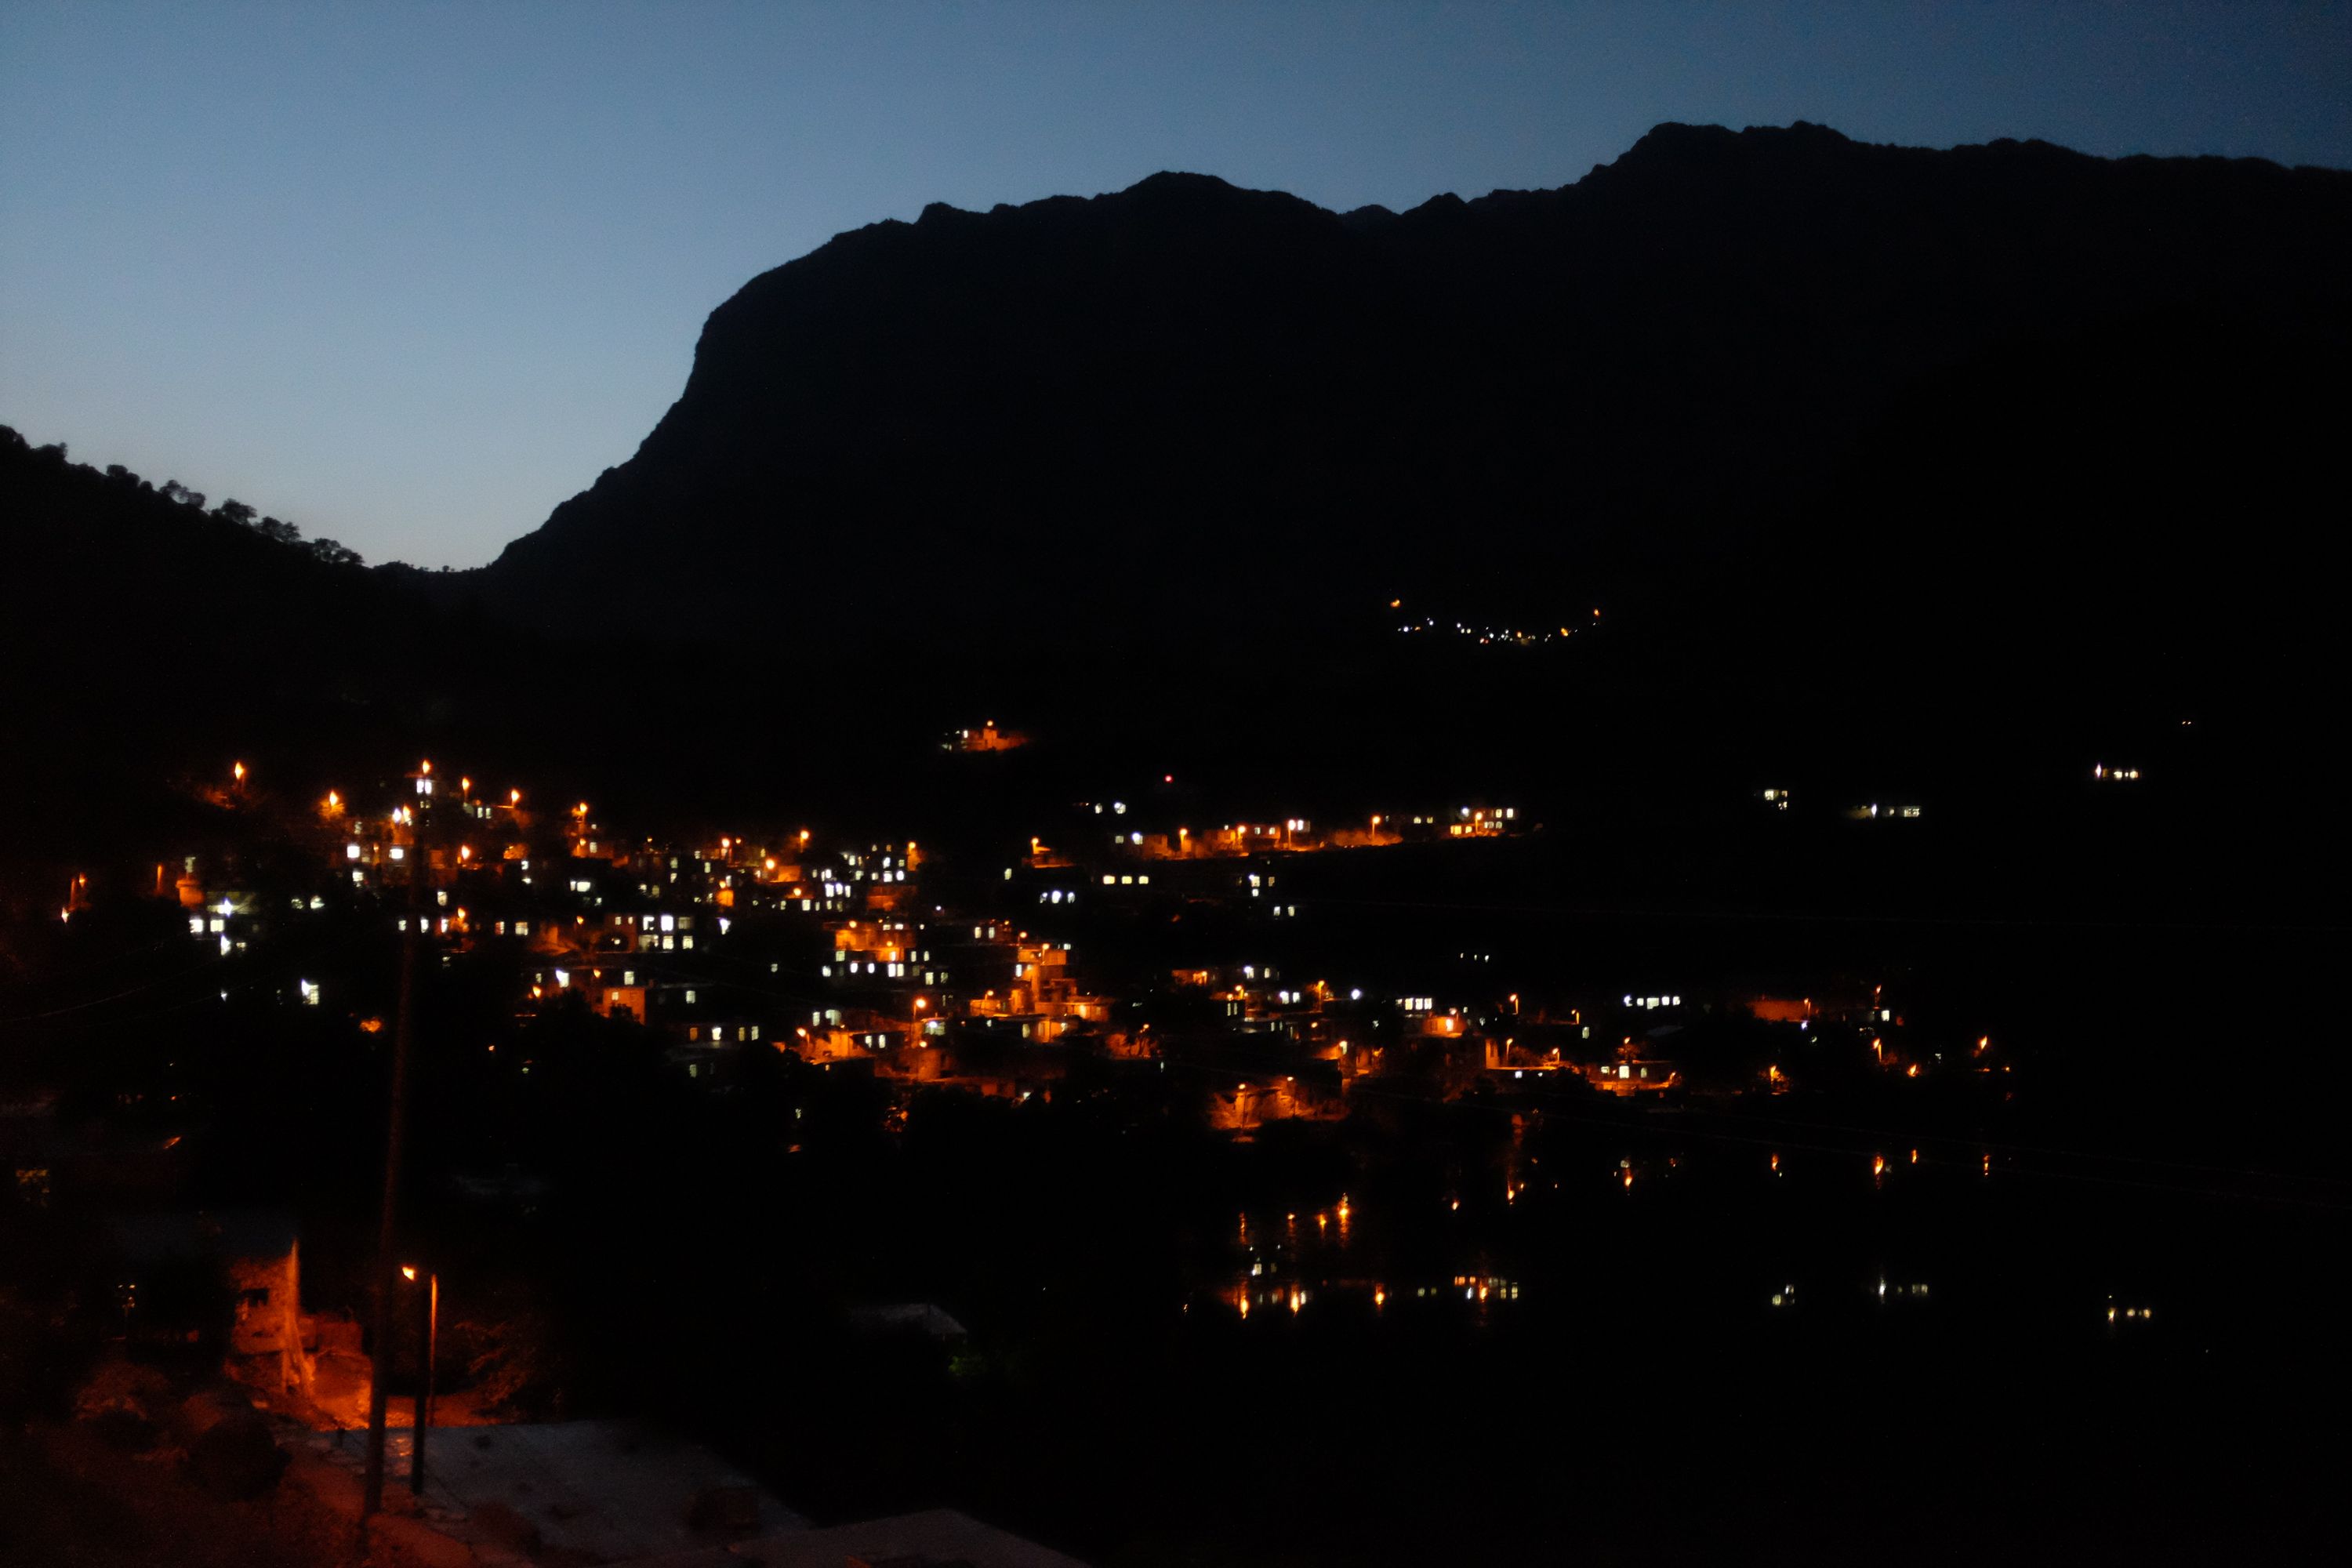 The lights of a small village in the mountains.